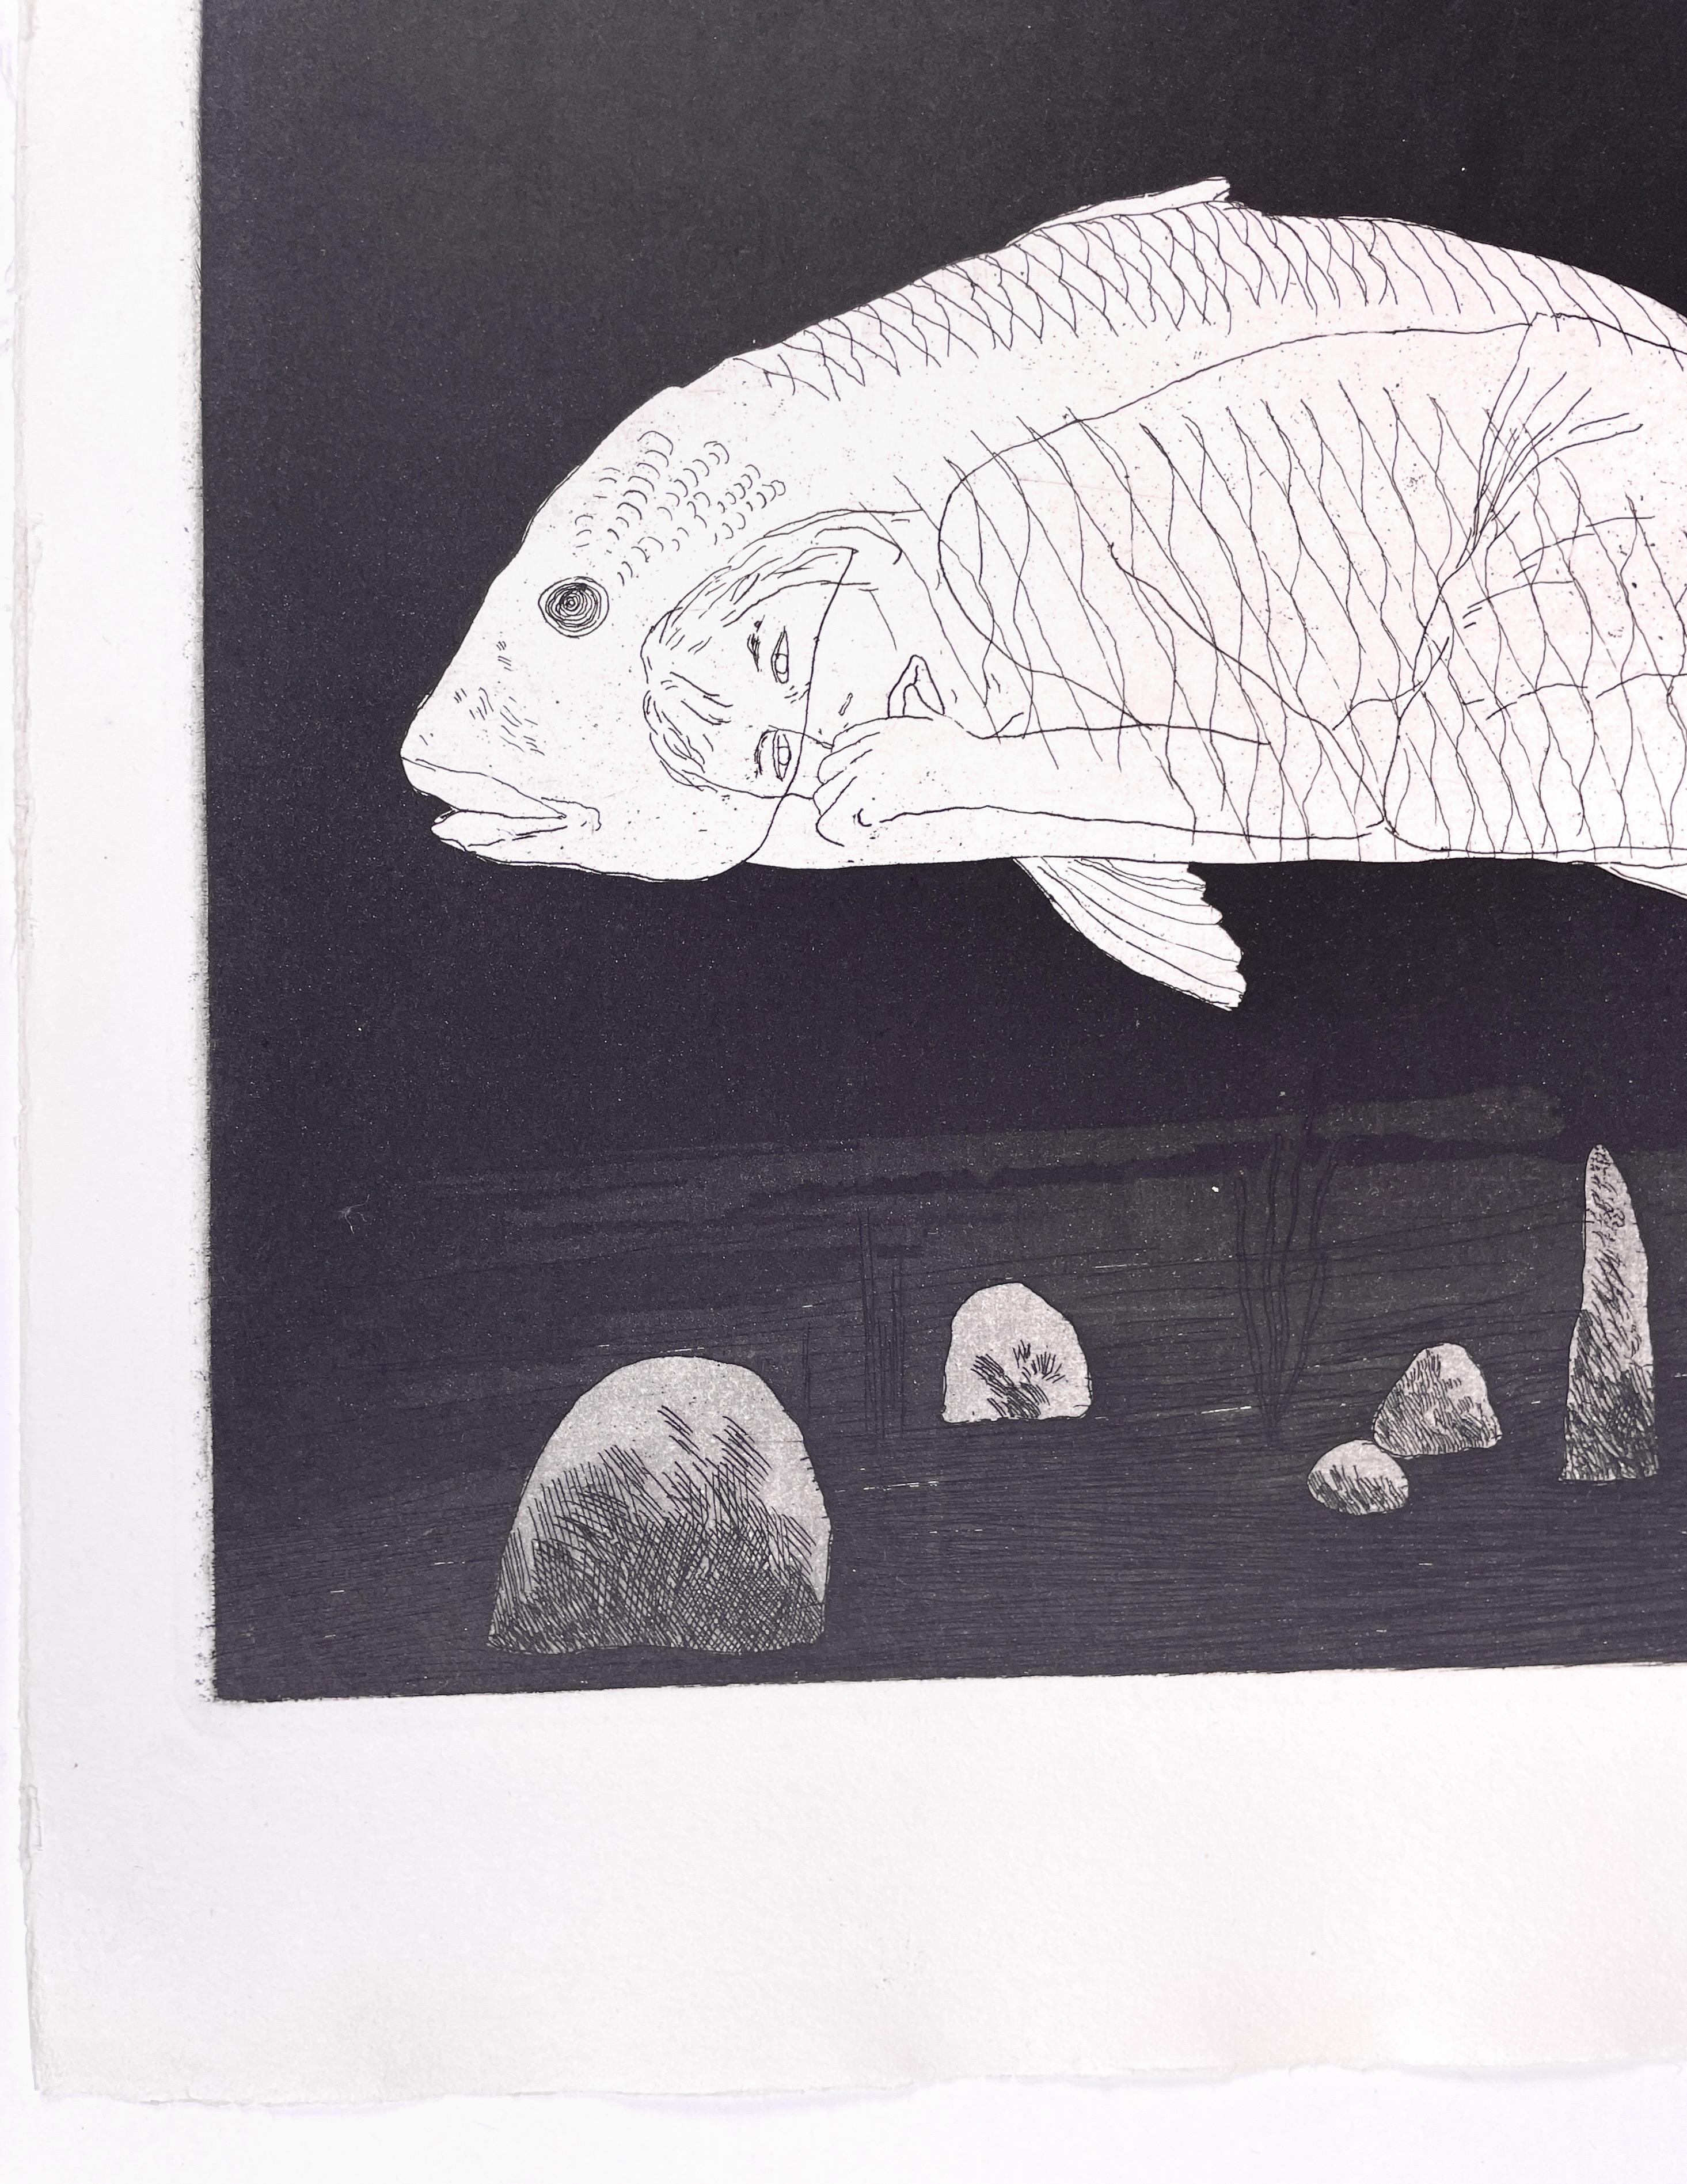 The Boy hidden in a Fish (Six Fairy Tales from the Brothers Grimm) - Modern Print by David Hockney